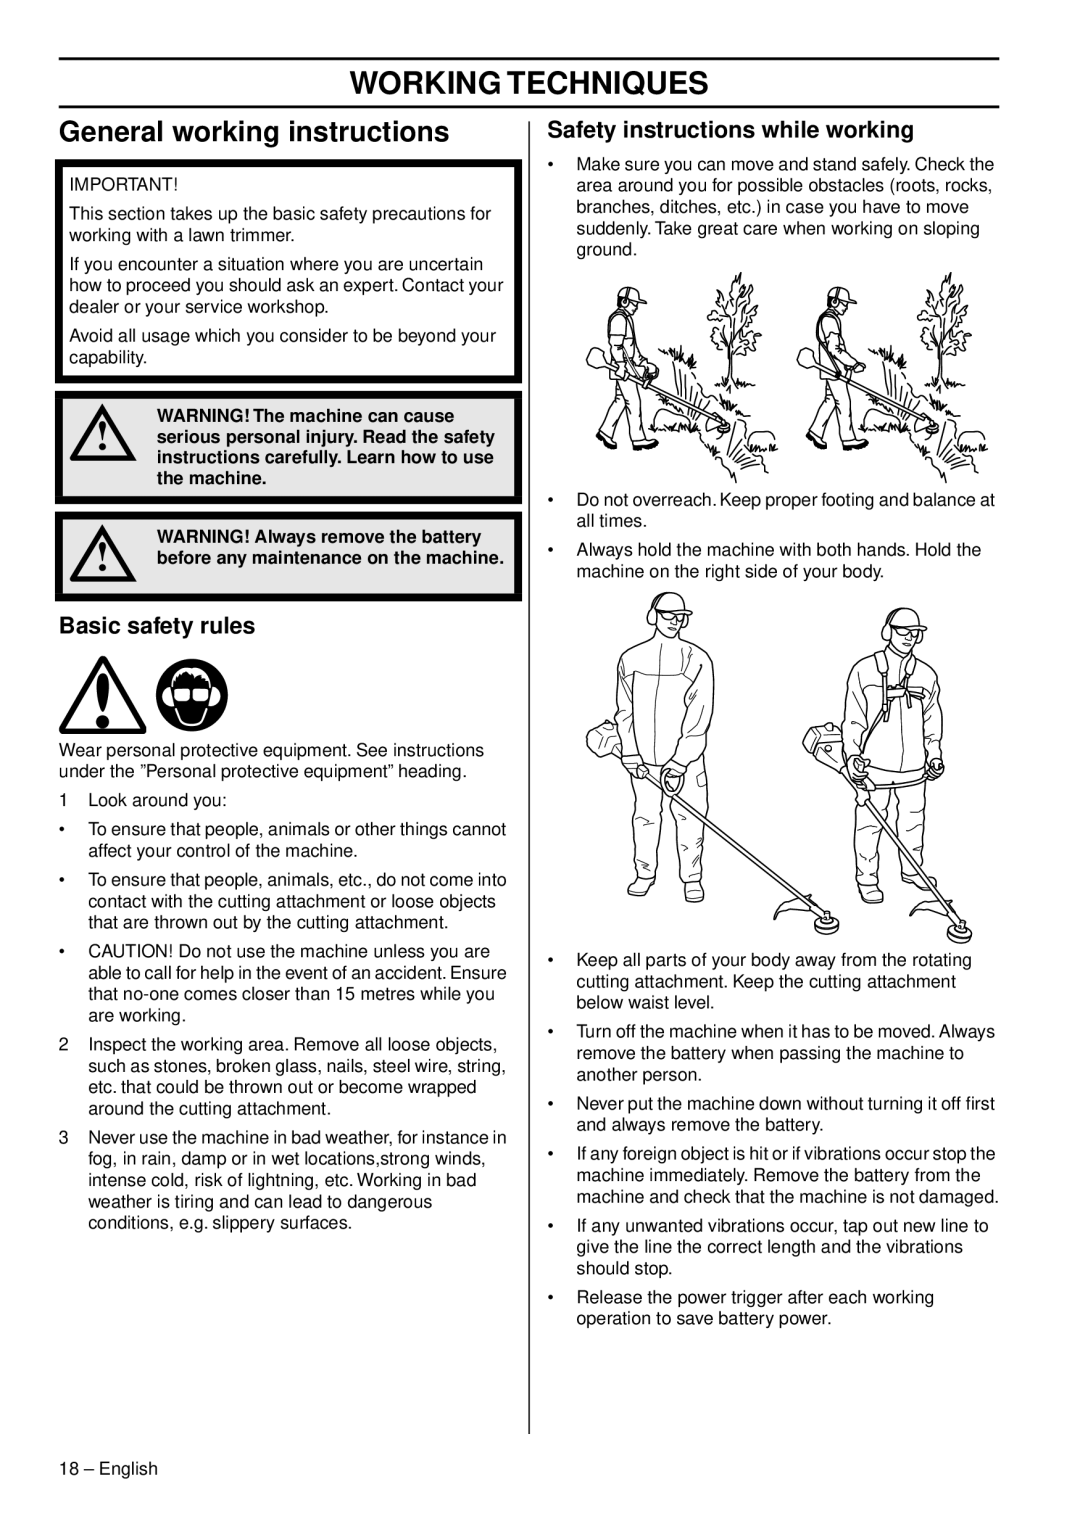 Husqvarna 536 LIR Working Techniques, General working instructions, Basic safety rules, Safety instructions while working 